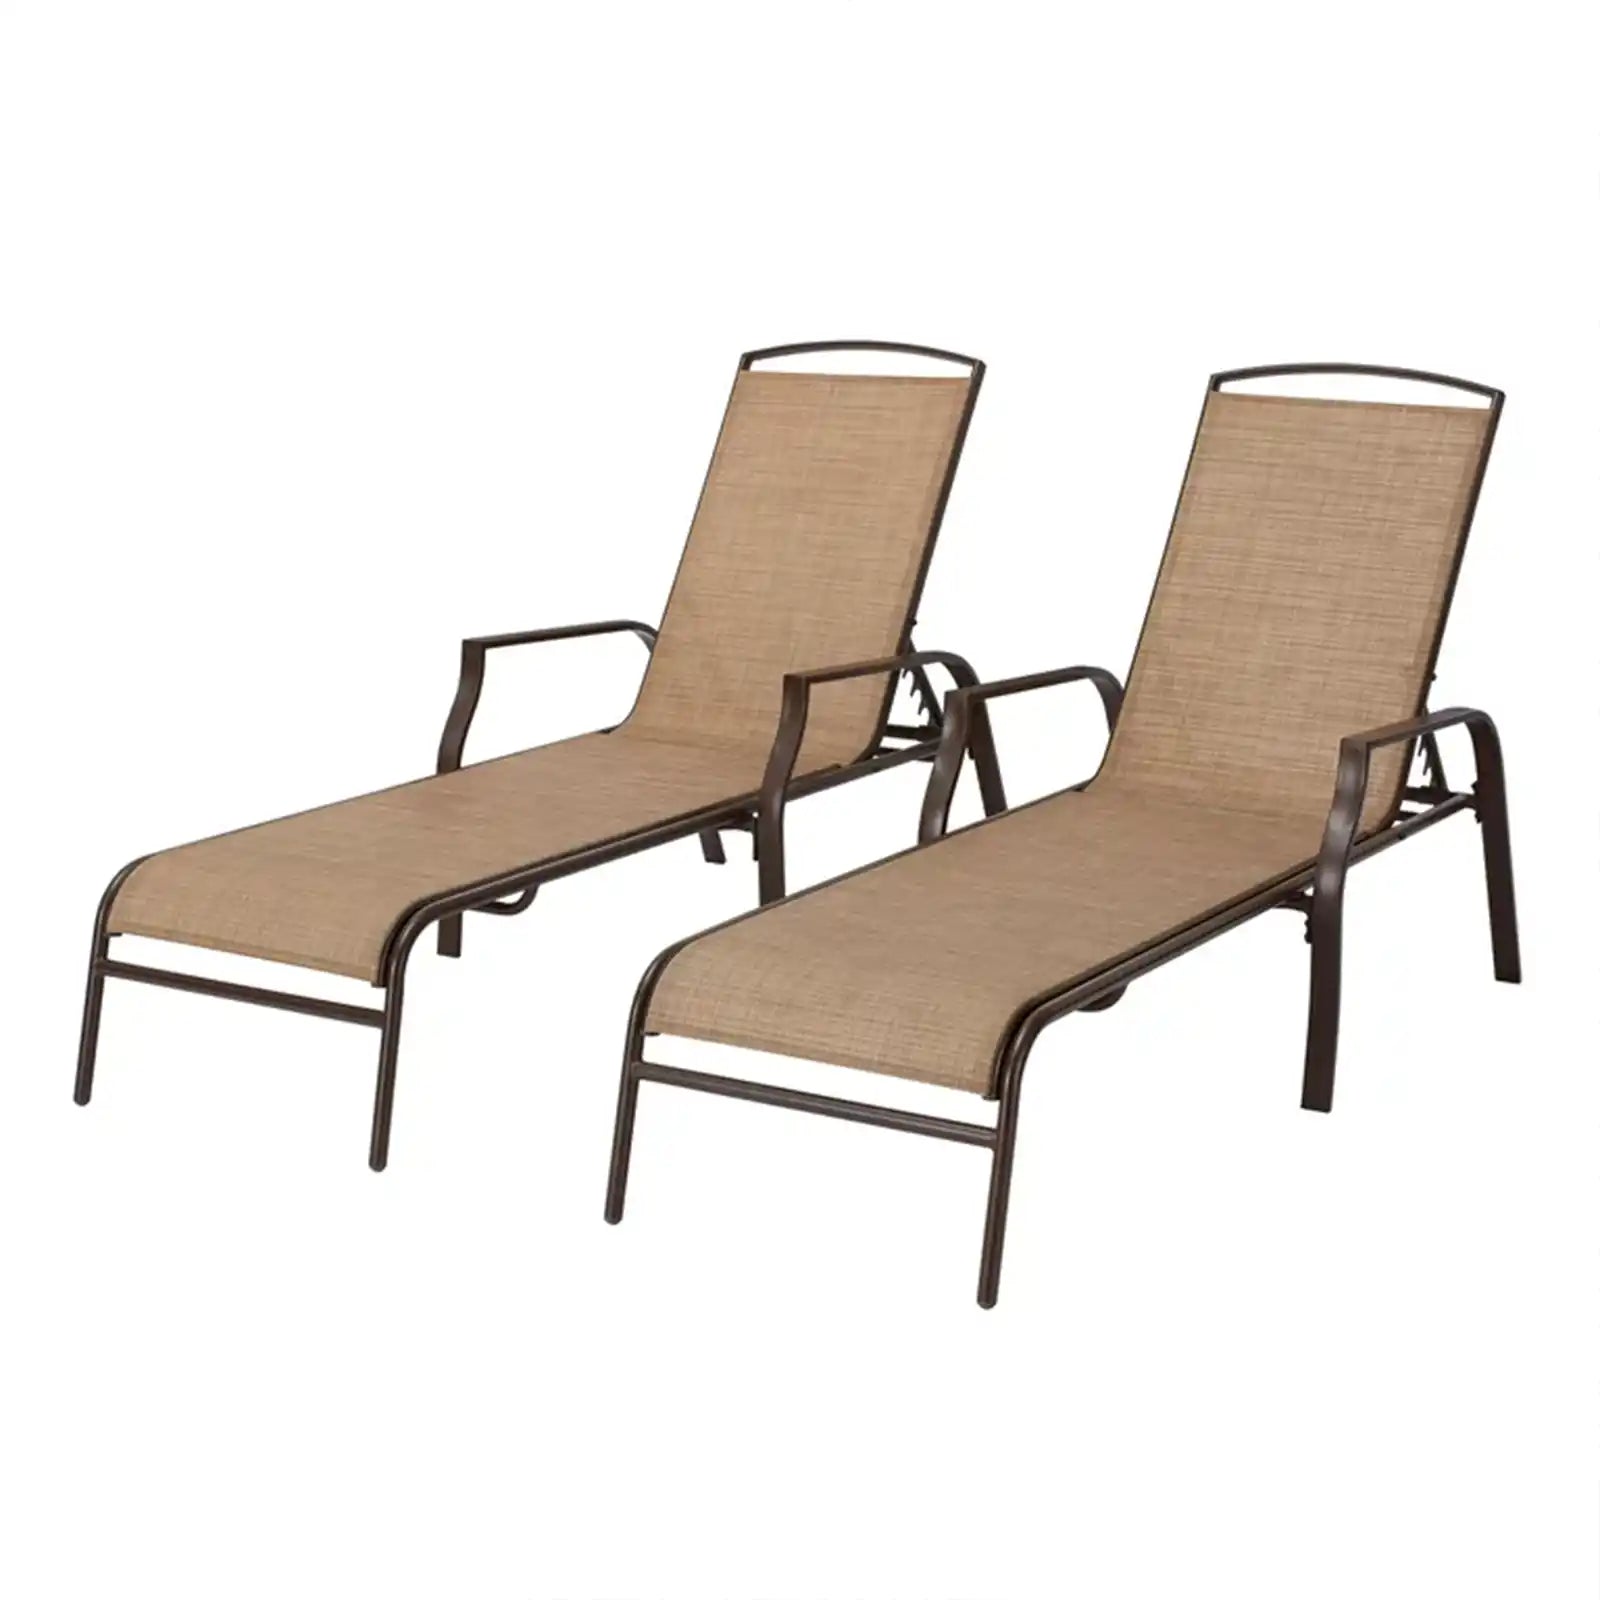 Reclining Steel Outdoor Chaise Lounge - Set of 2